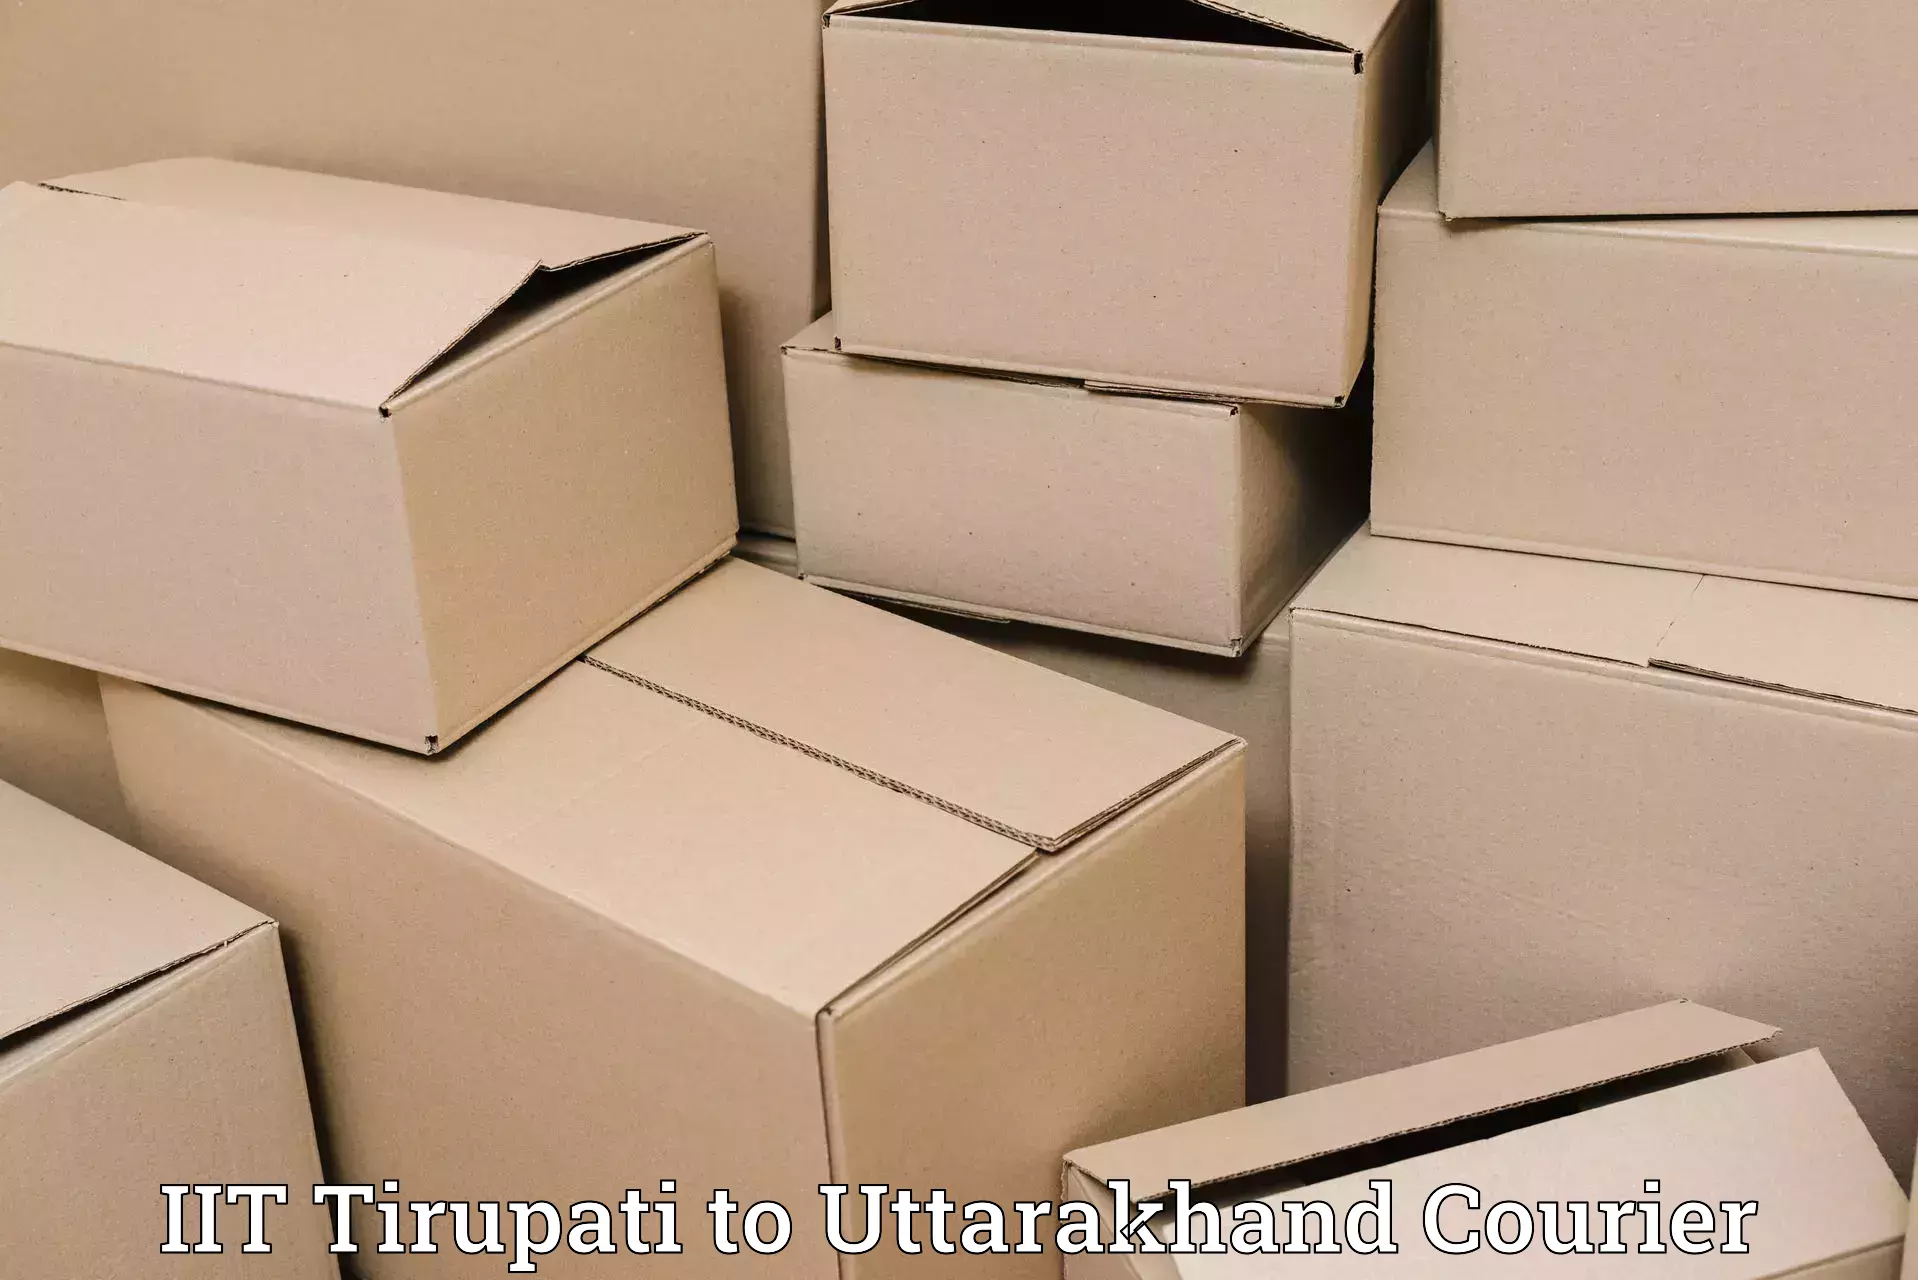 State-of-the-art courier technology IIT Tirupati to Tehri Garhwal